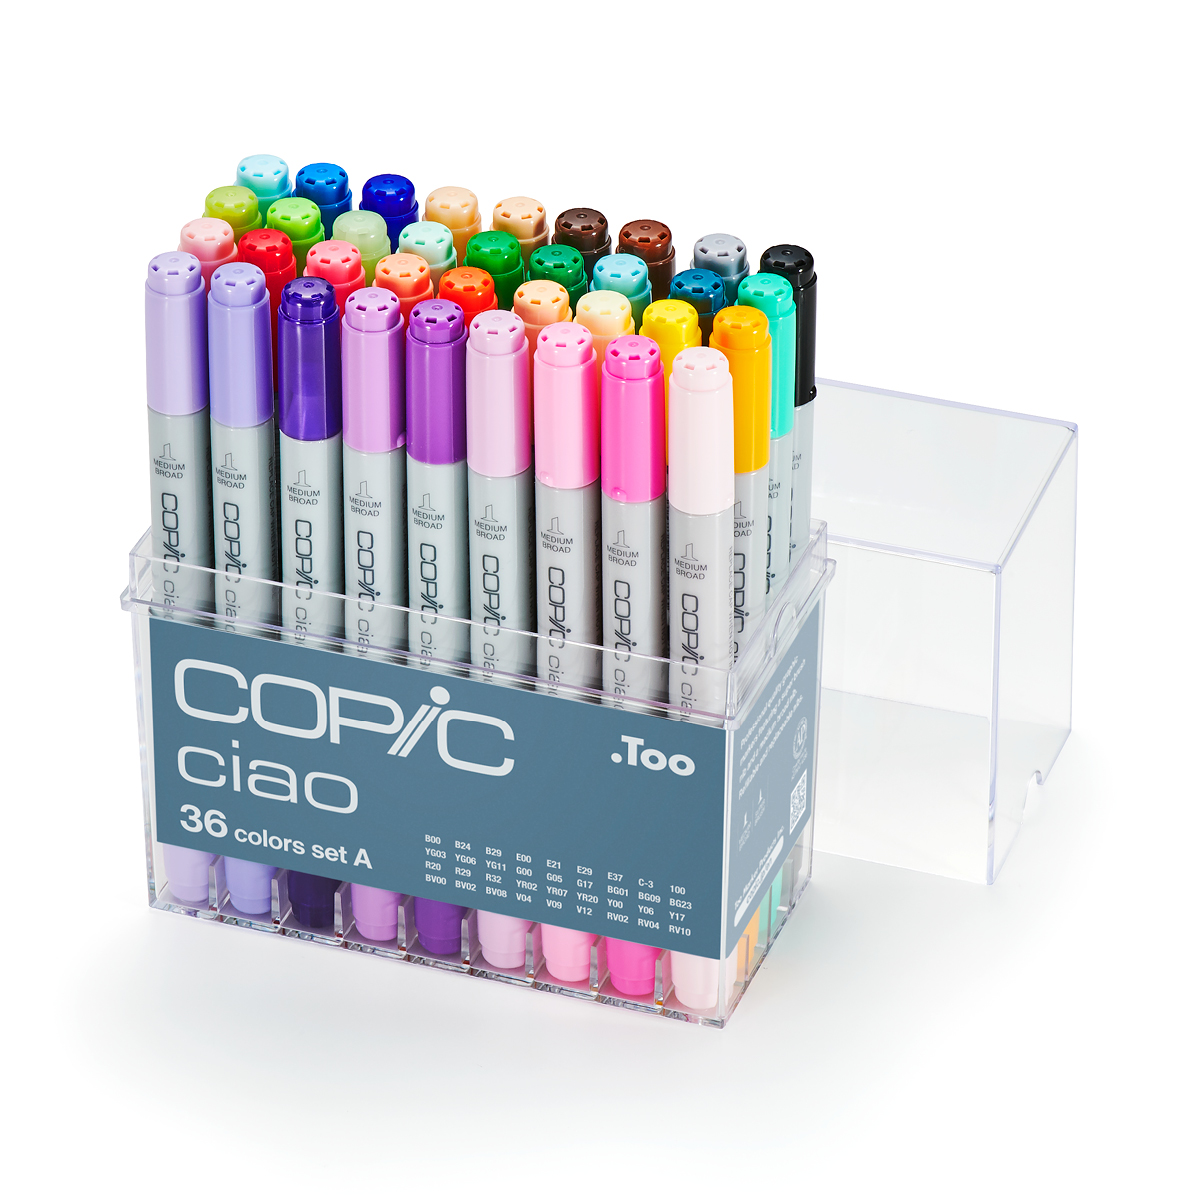 Copic Ciao Start 36 Color Set